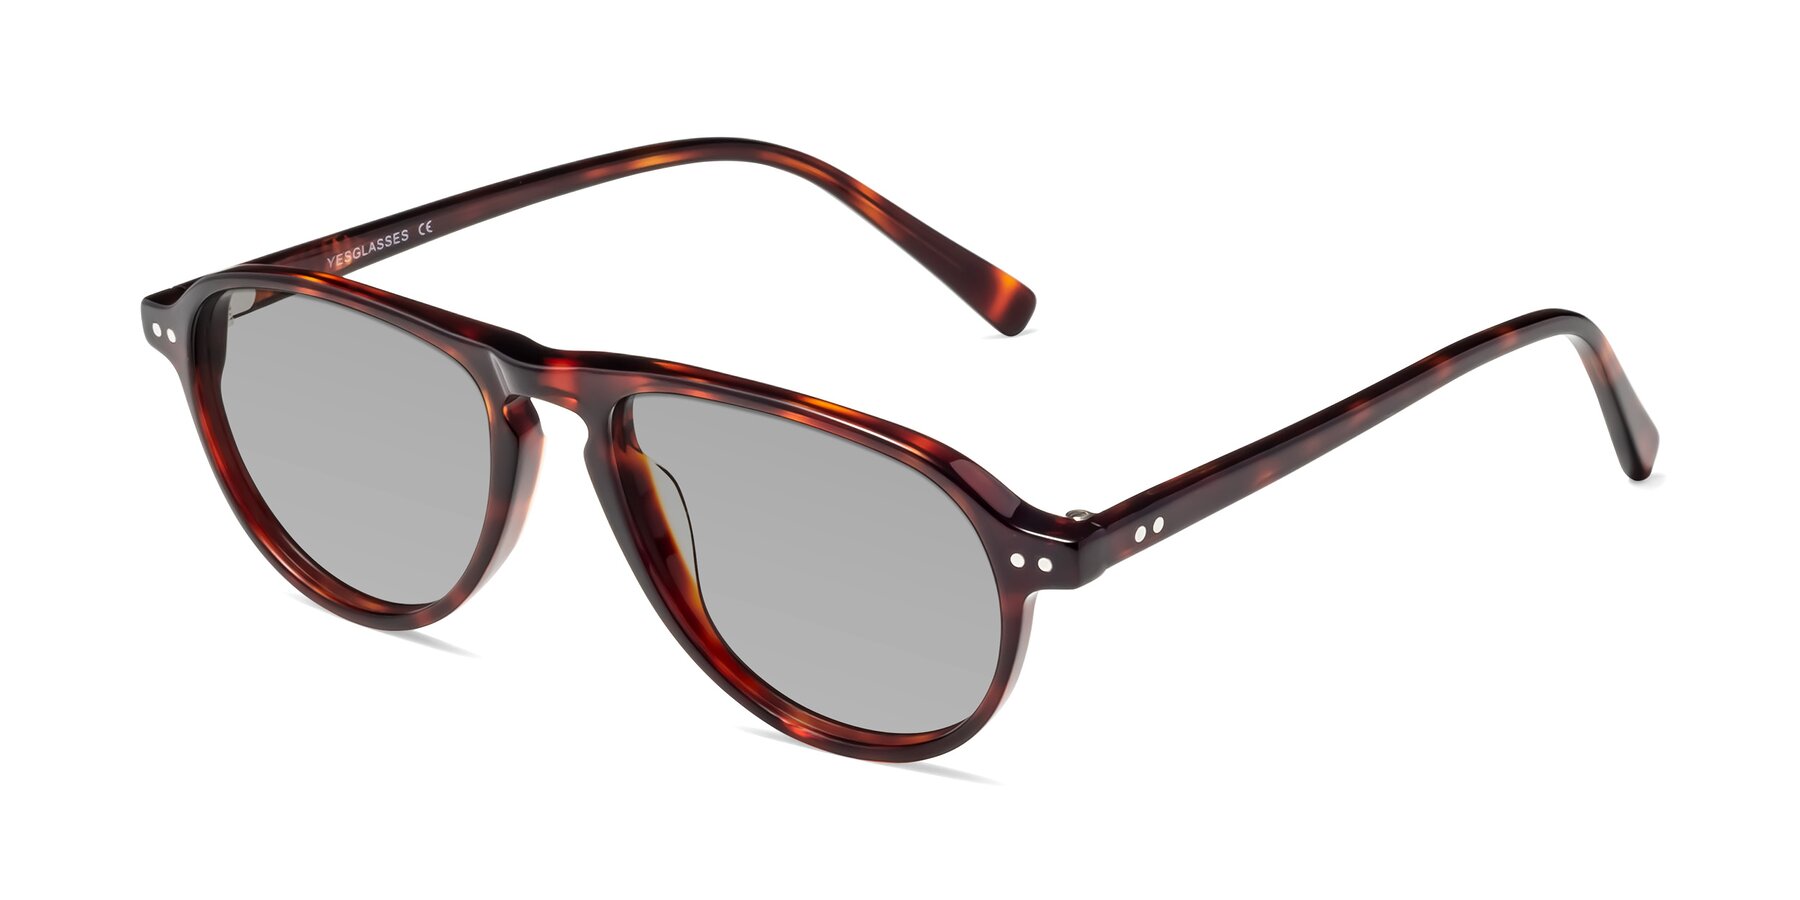 Angle of 17544 in Burgundy Tortoise with Light Gray Tinted Lenses